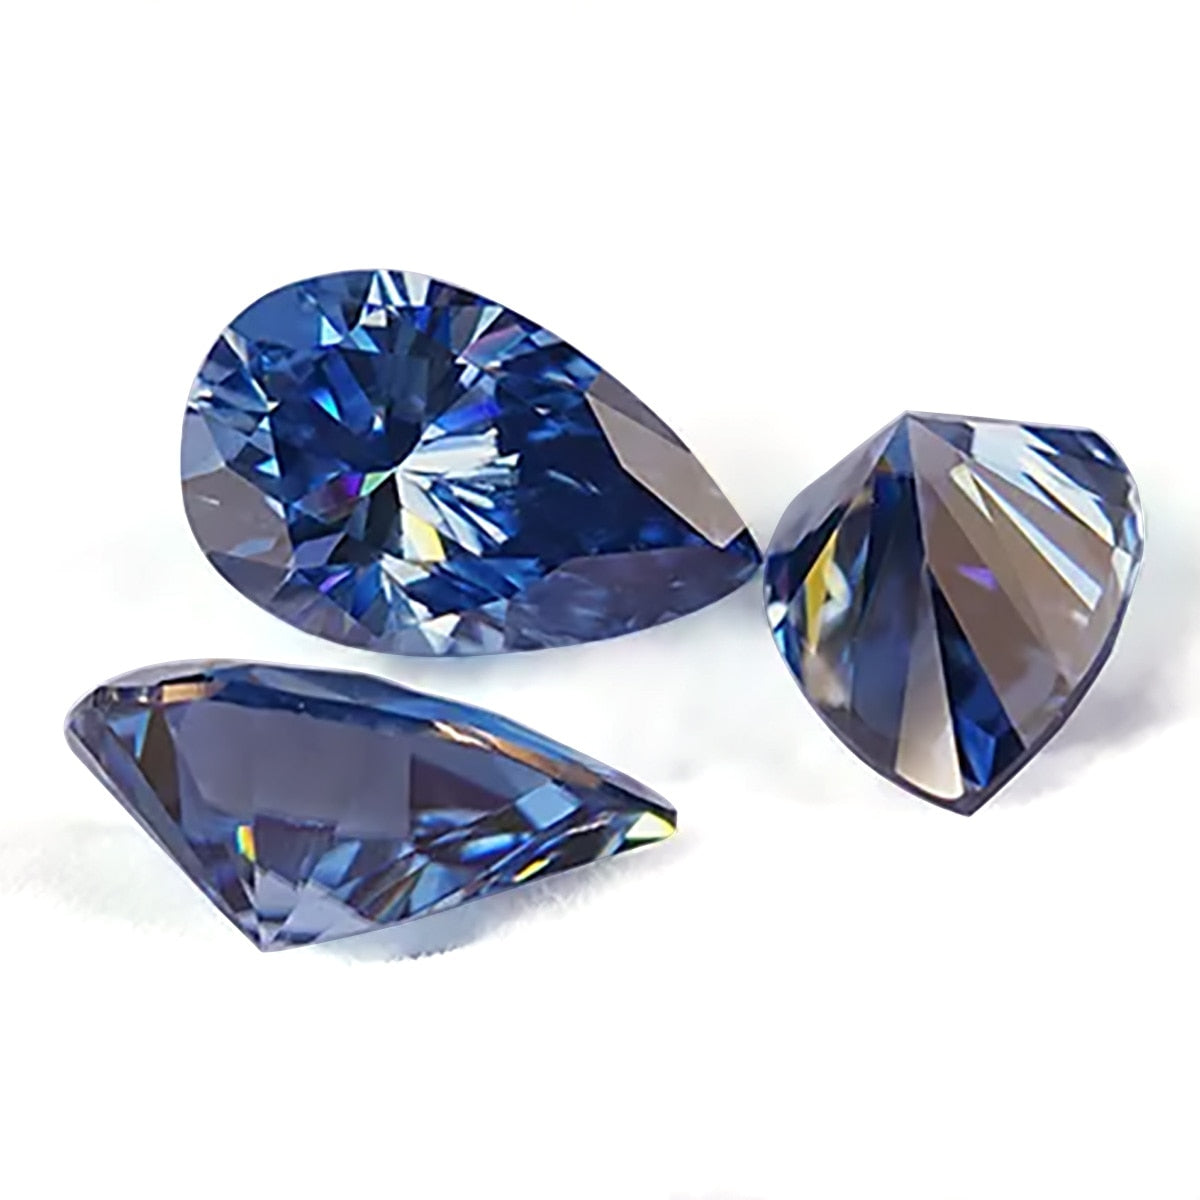 Blue Color. Moissanite Gemstone. Teardrop Shape. From 0.35 to 13.0 Carat.